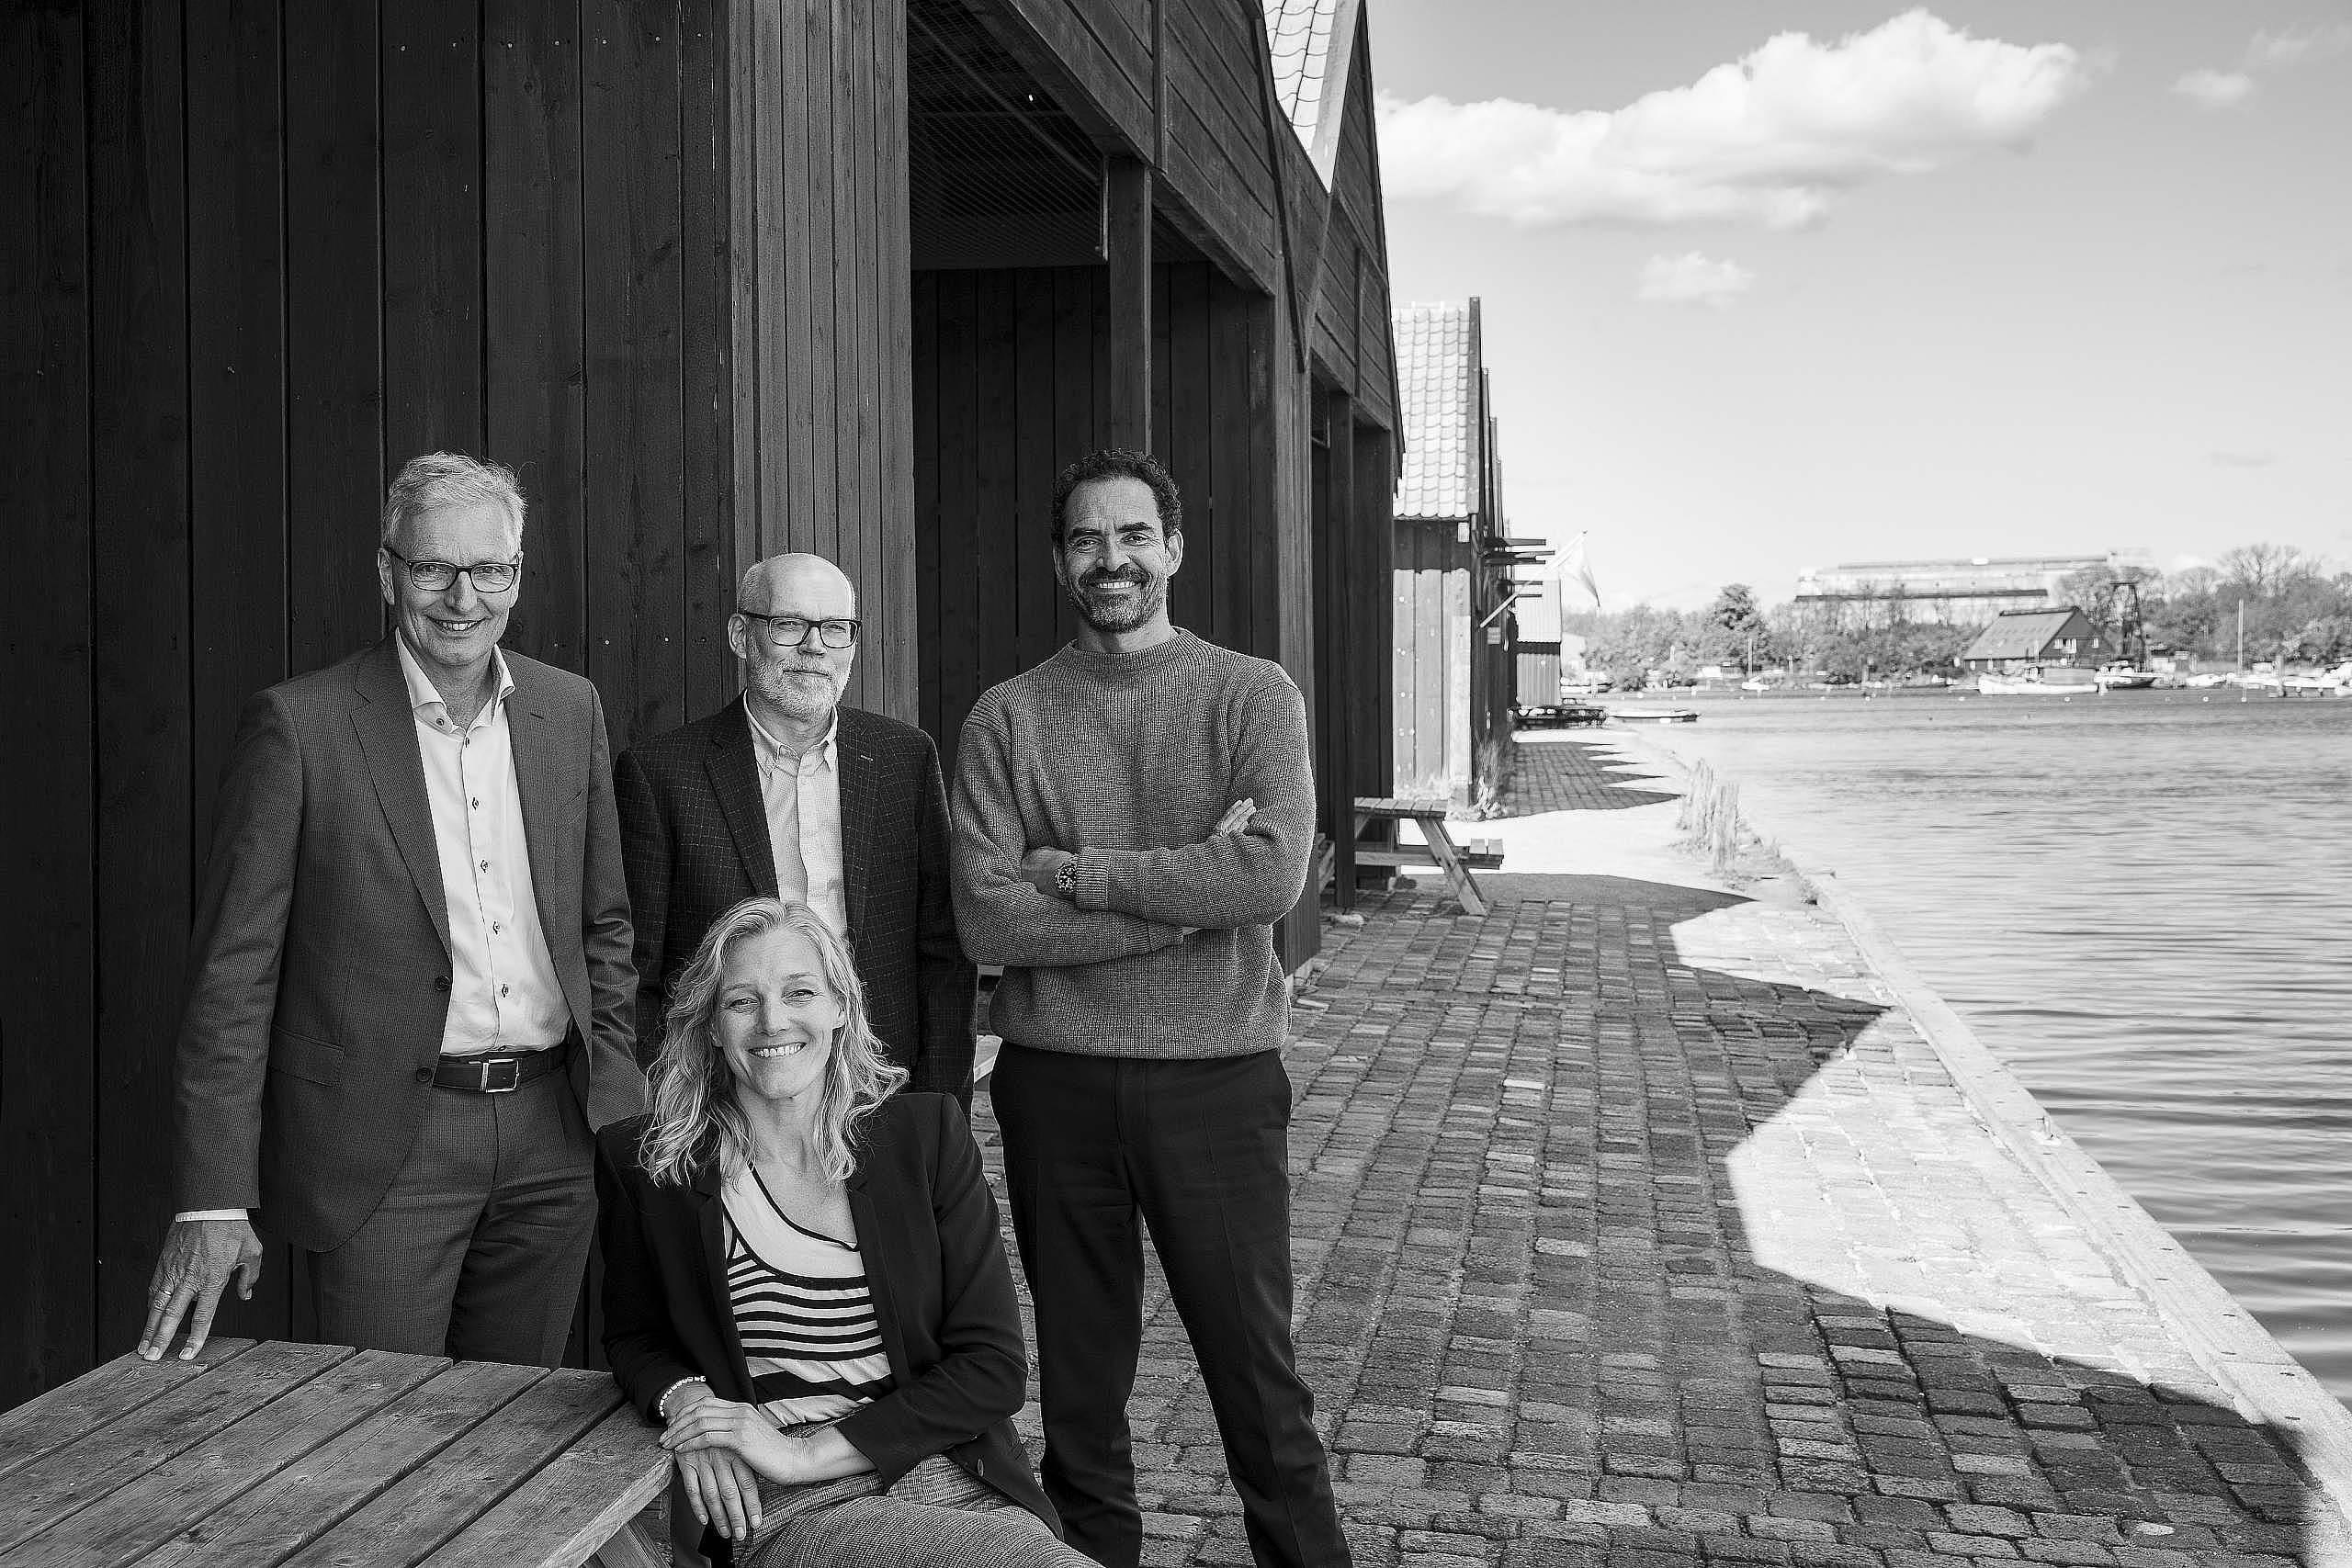 KHR Architecture's partners in front of the cannon boathouses on Holmen where the firm has had offices for the last 15 years